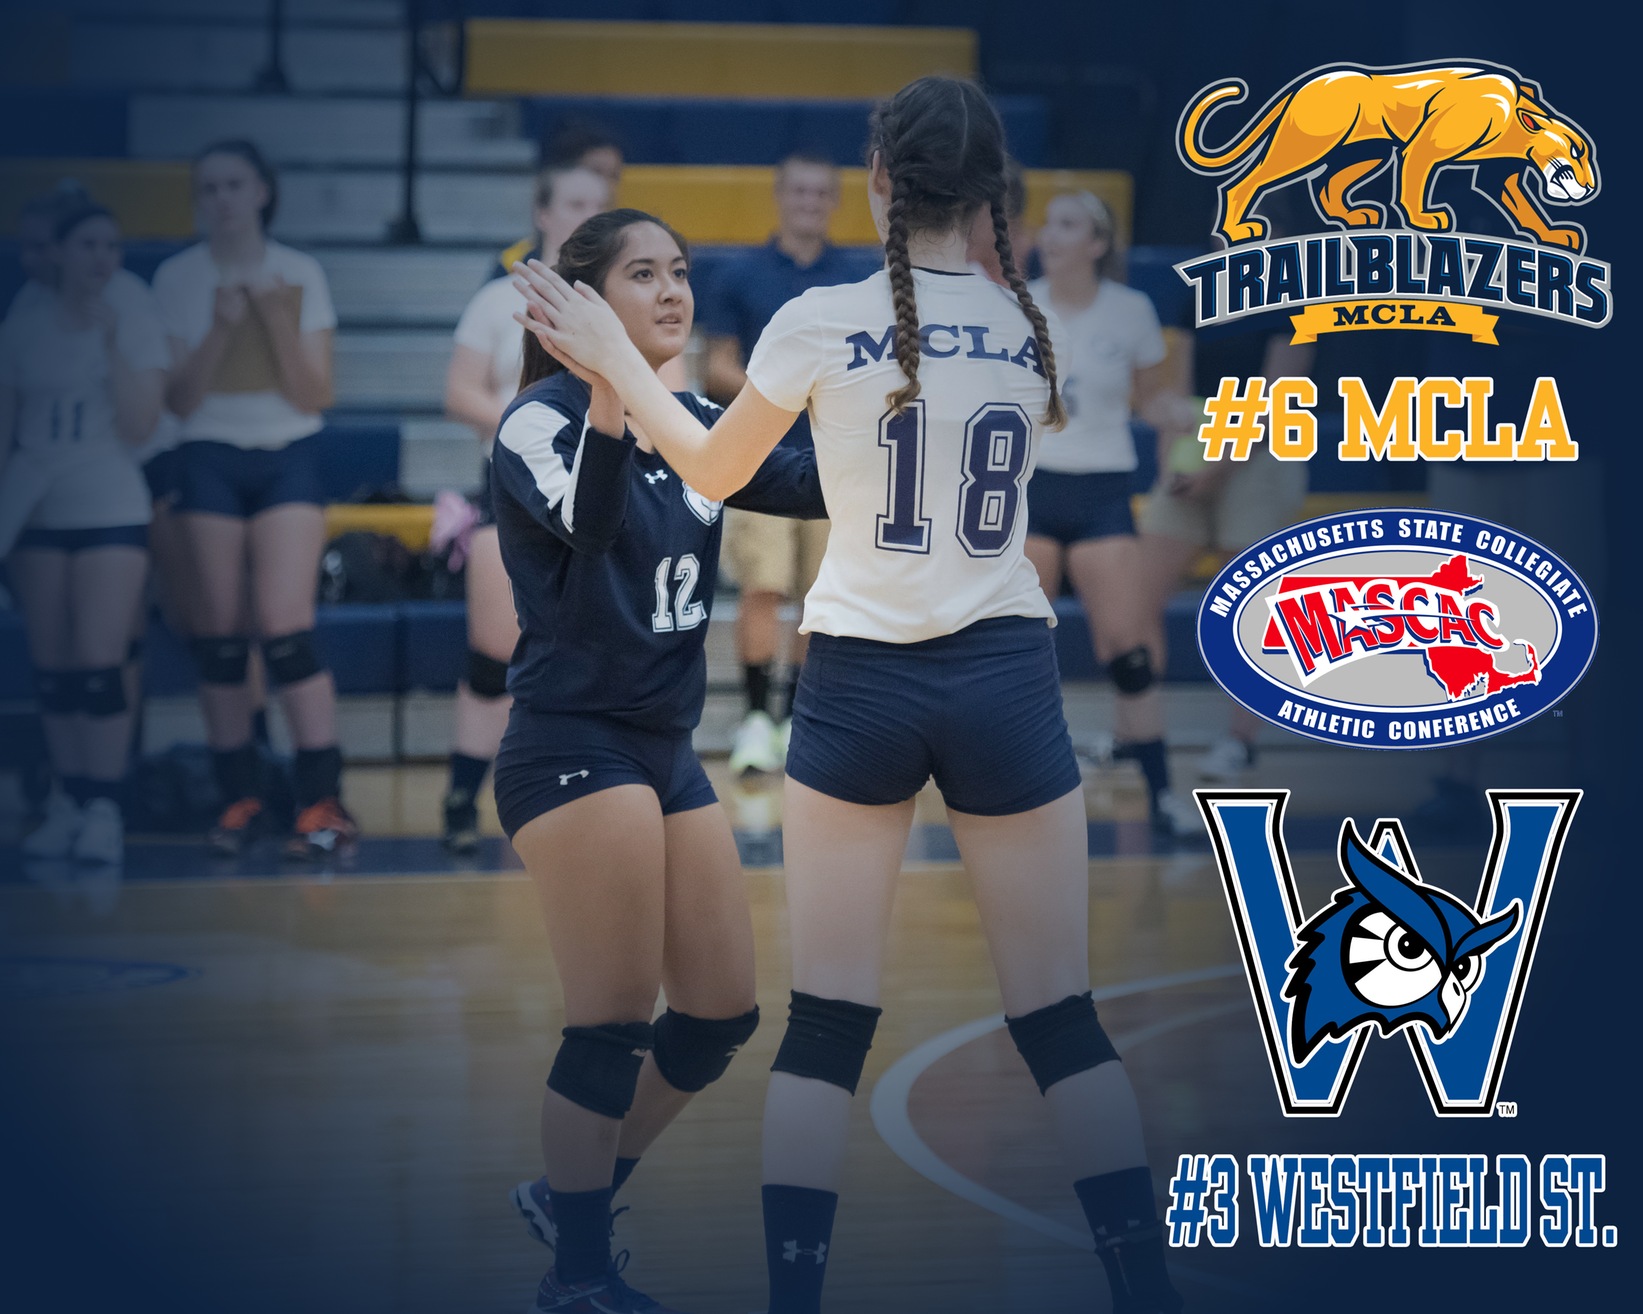 Volleyball seeded sixth in MASCAC tournament, will be at #3 Westfield State tomorrow